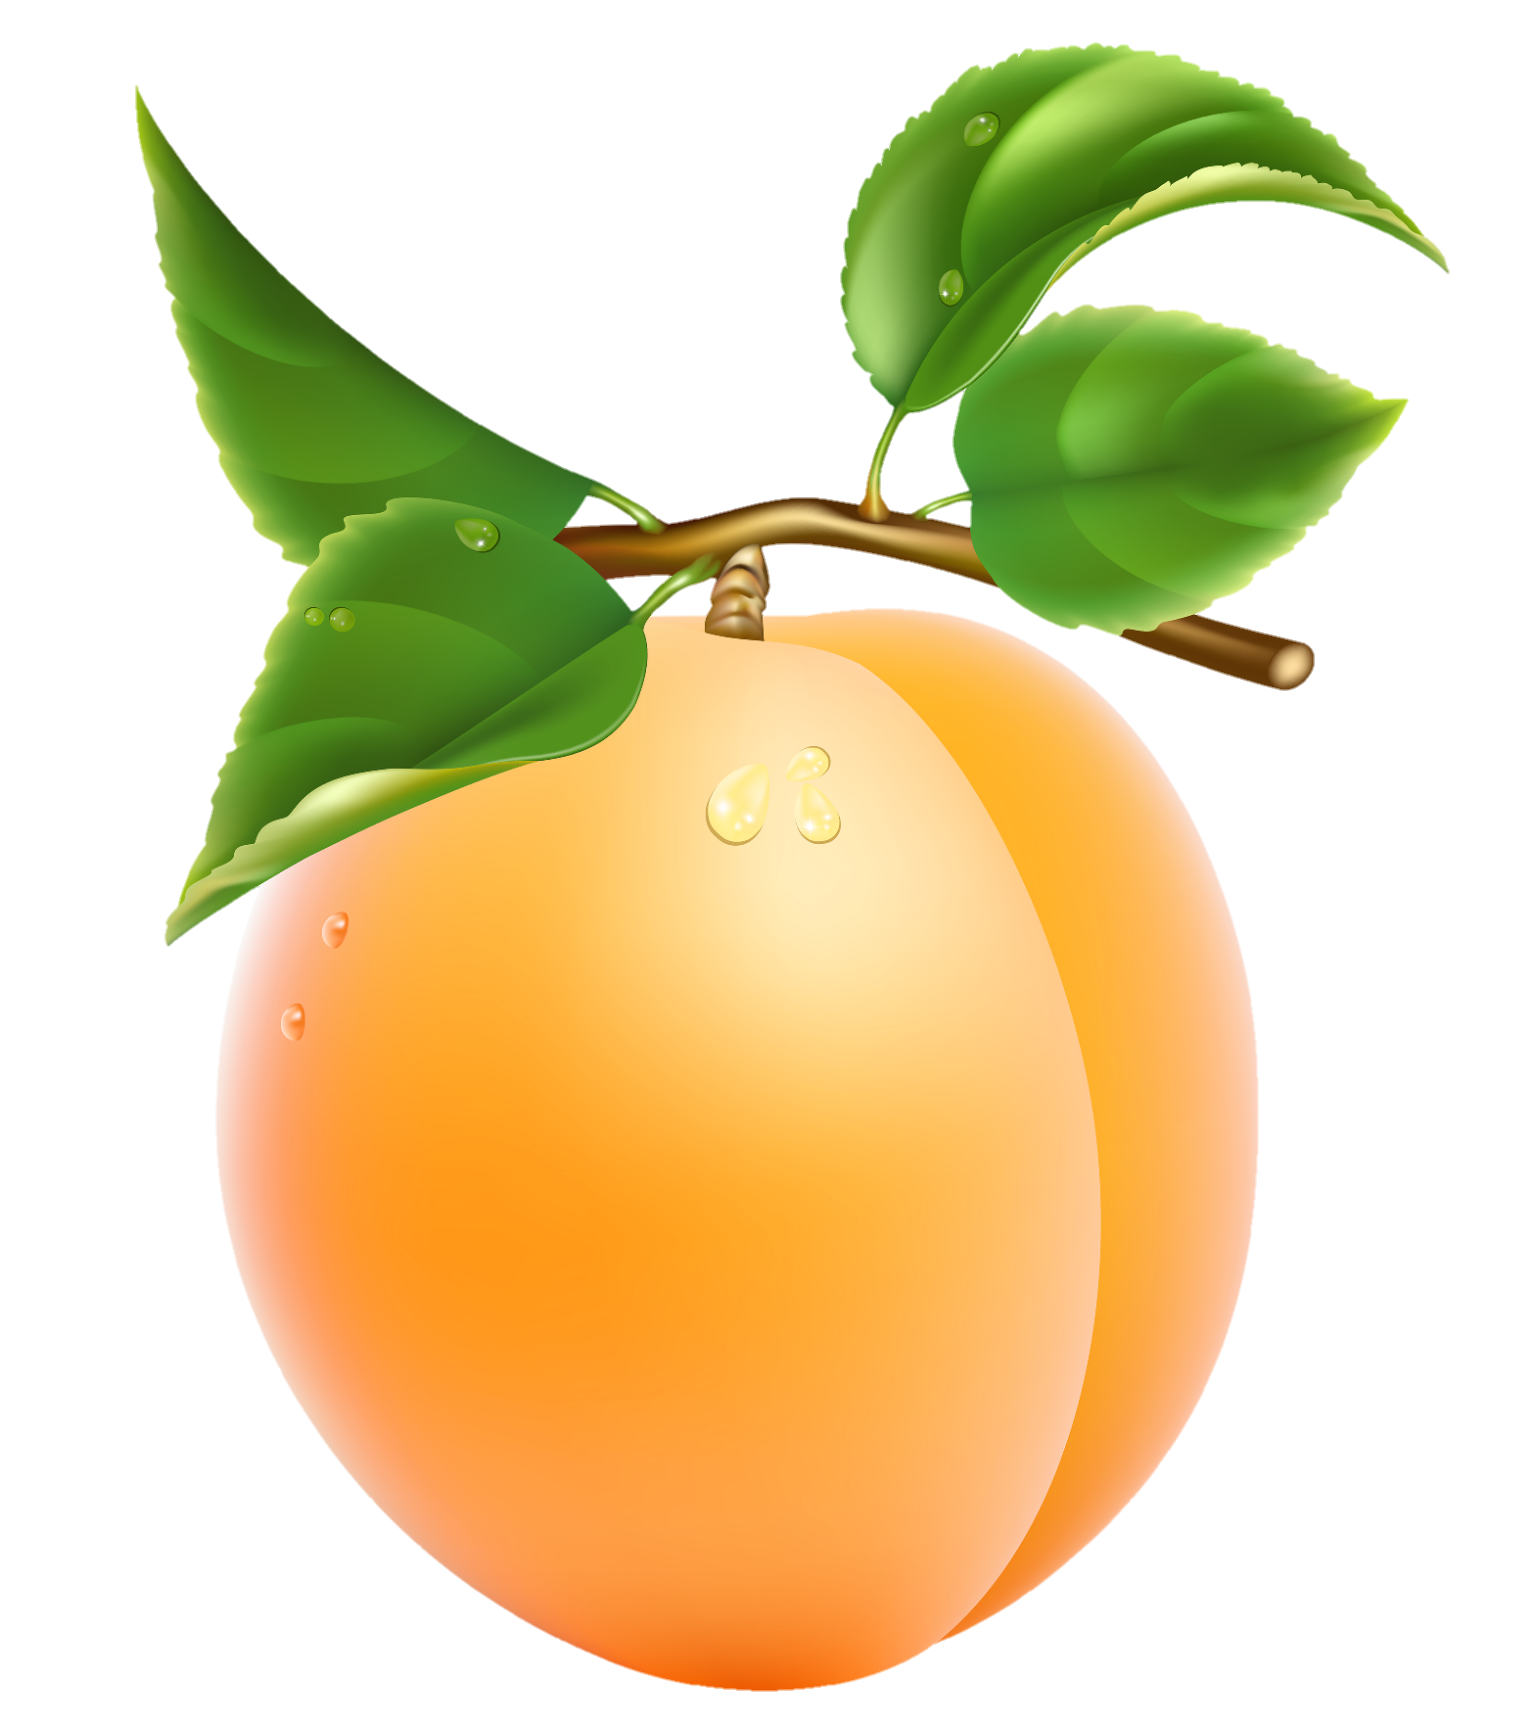 peach-png-image-from-pngfre-34